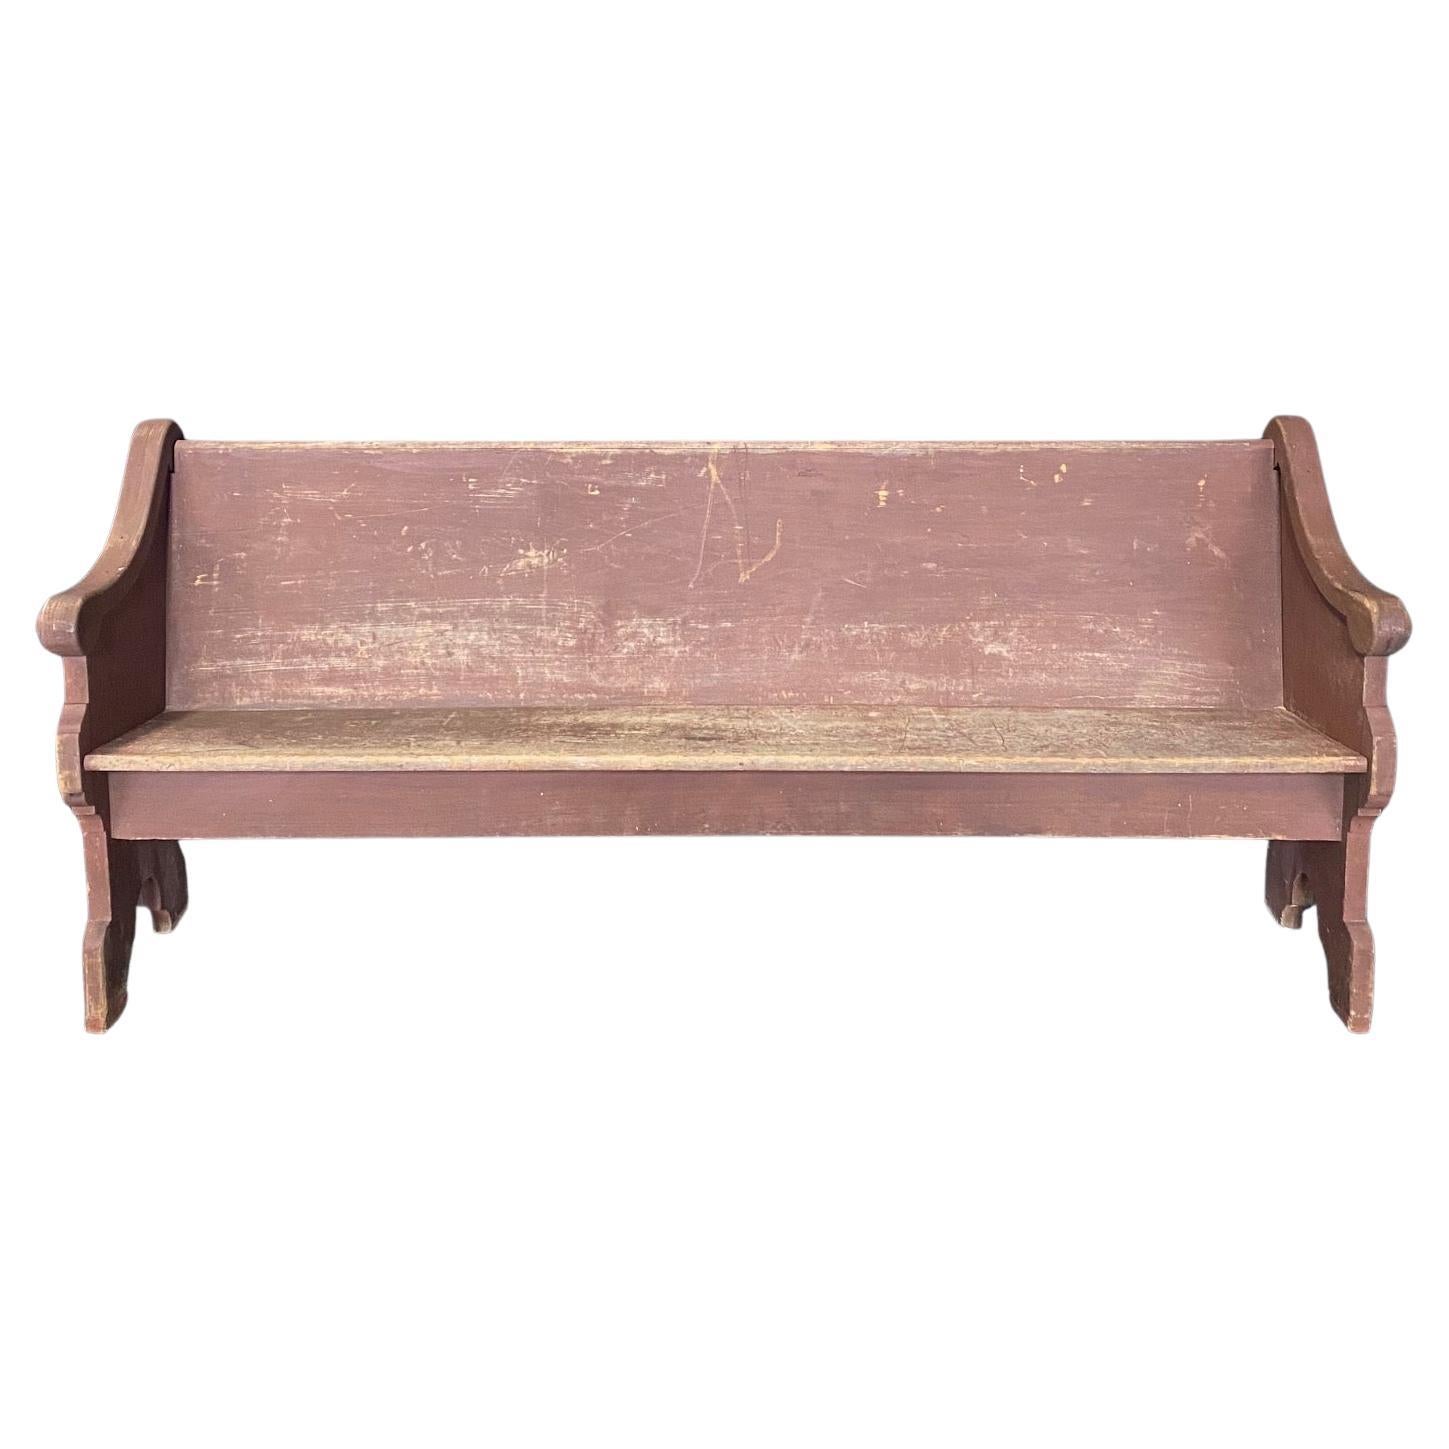 Rustic 19th Century Americana Church Pew Bench with Original Paint For Sale